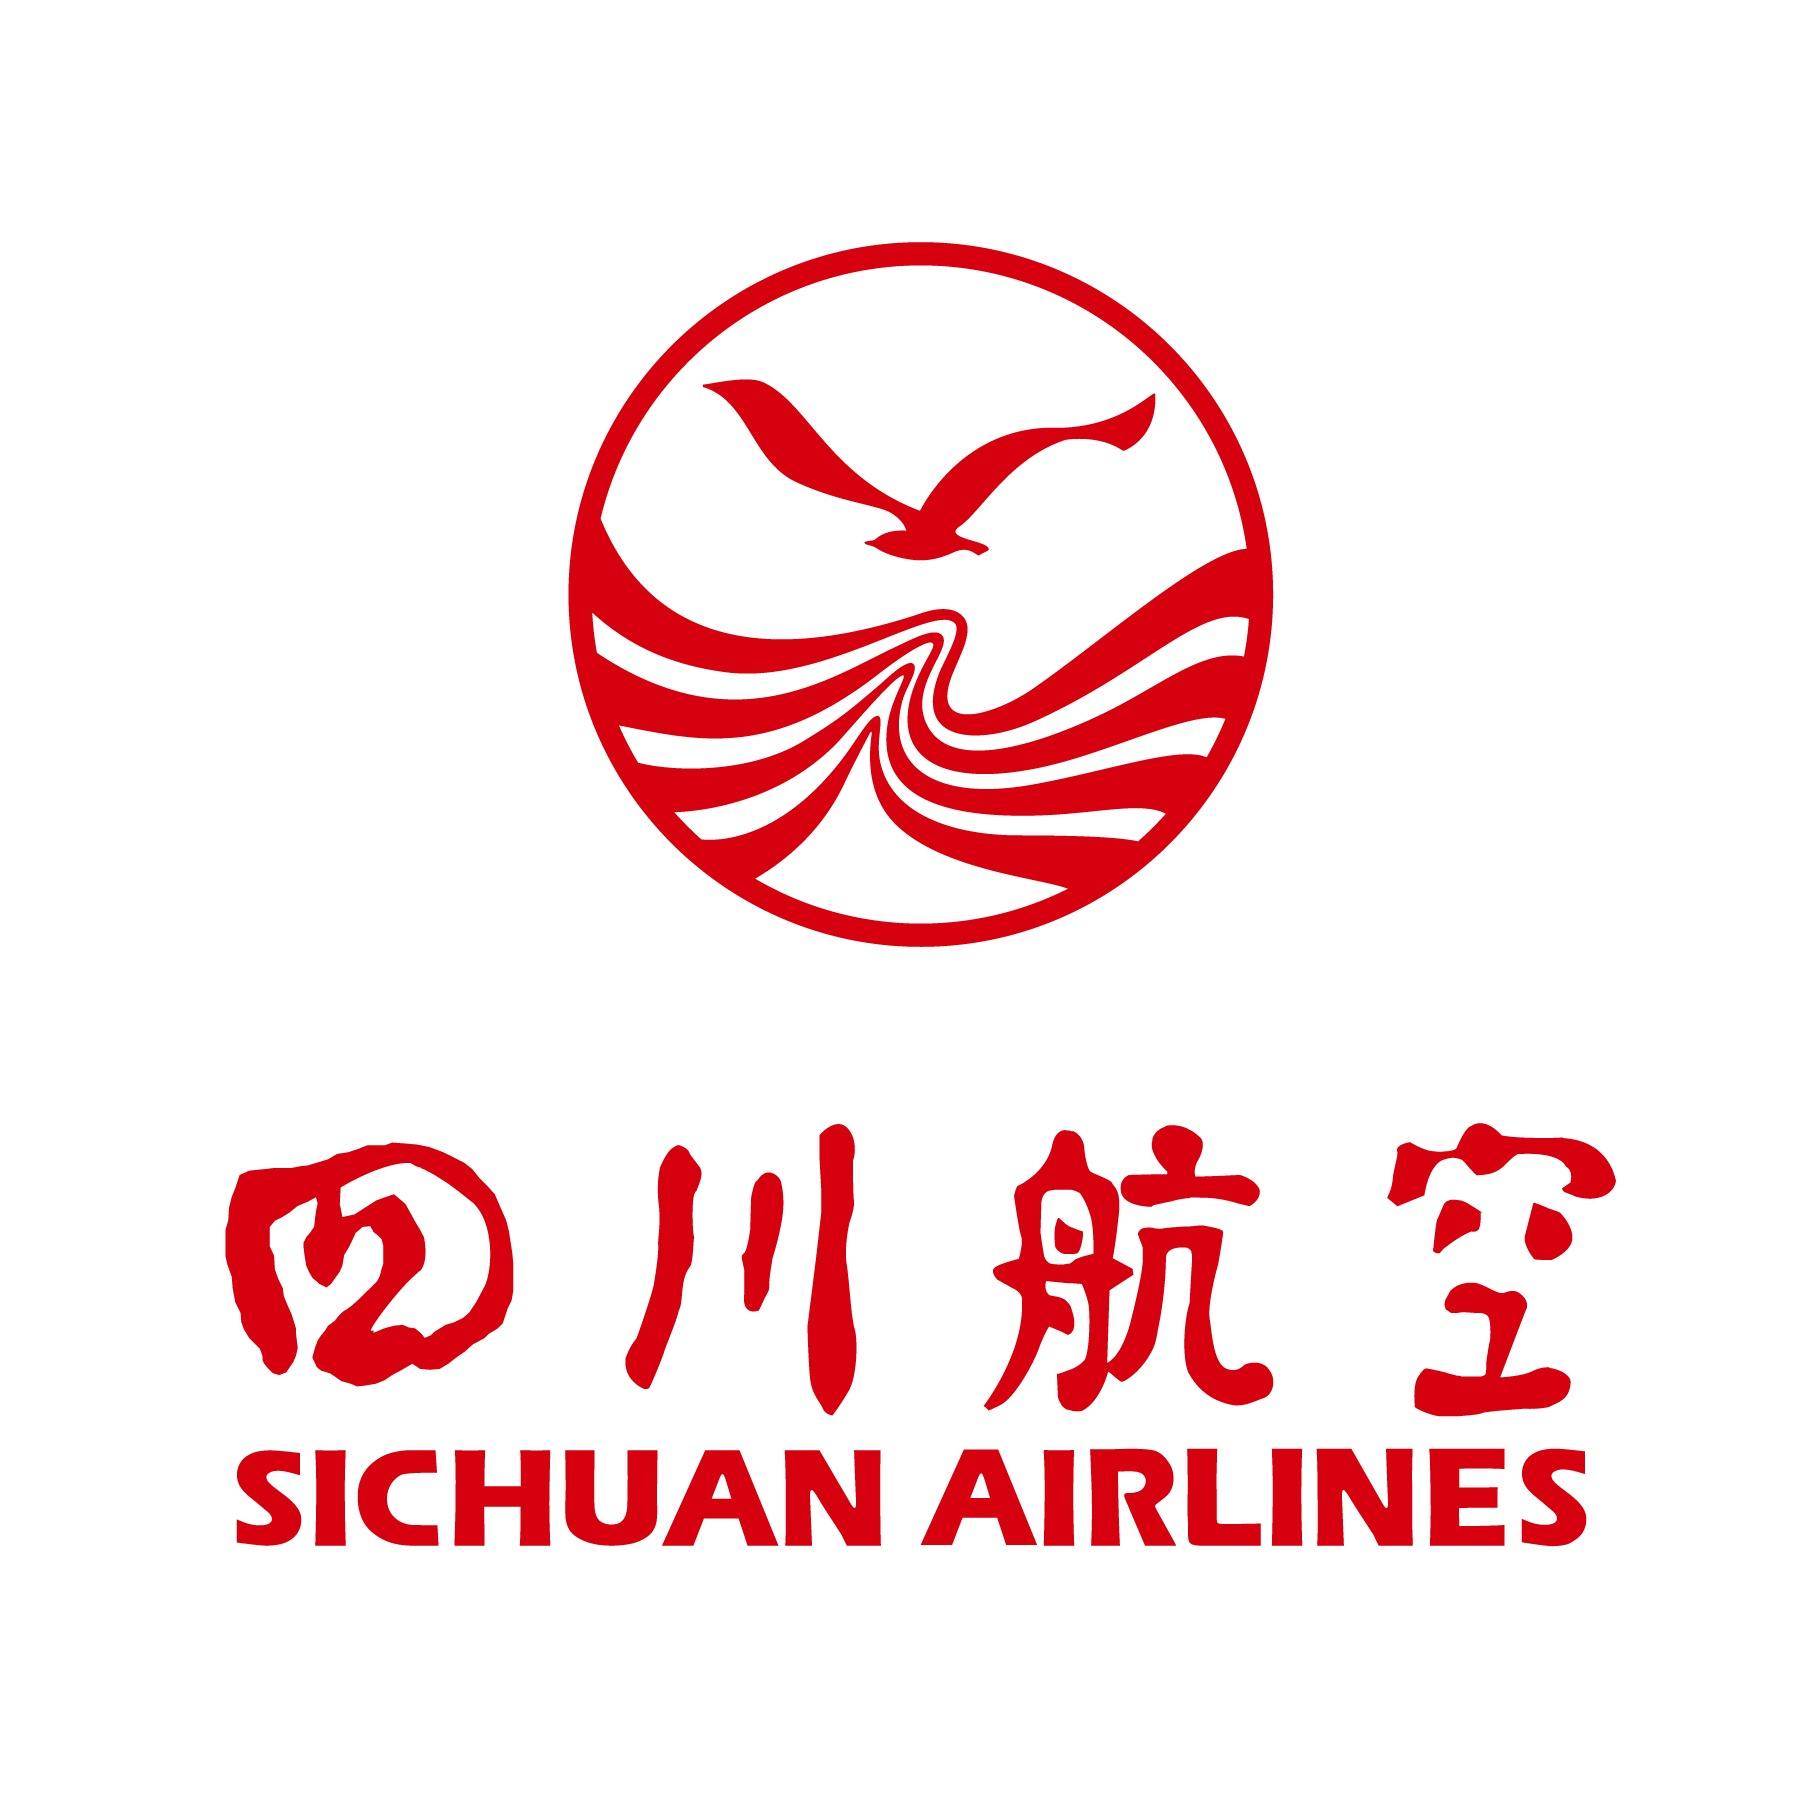 Sichuan Airlines Corporation